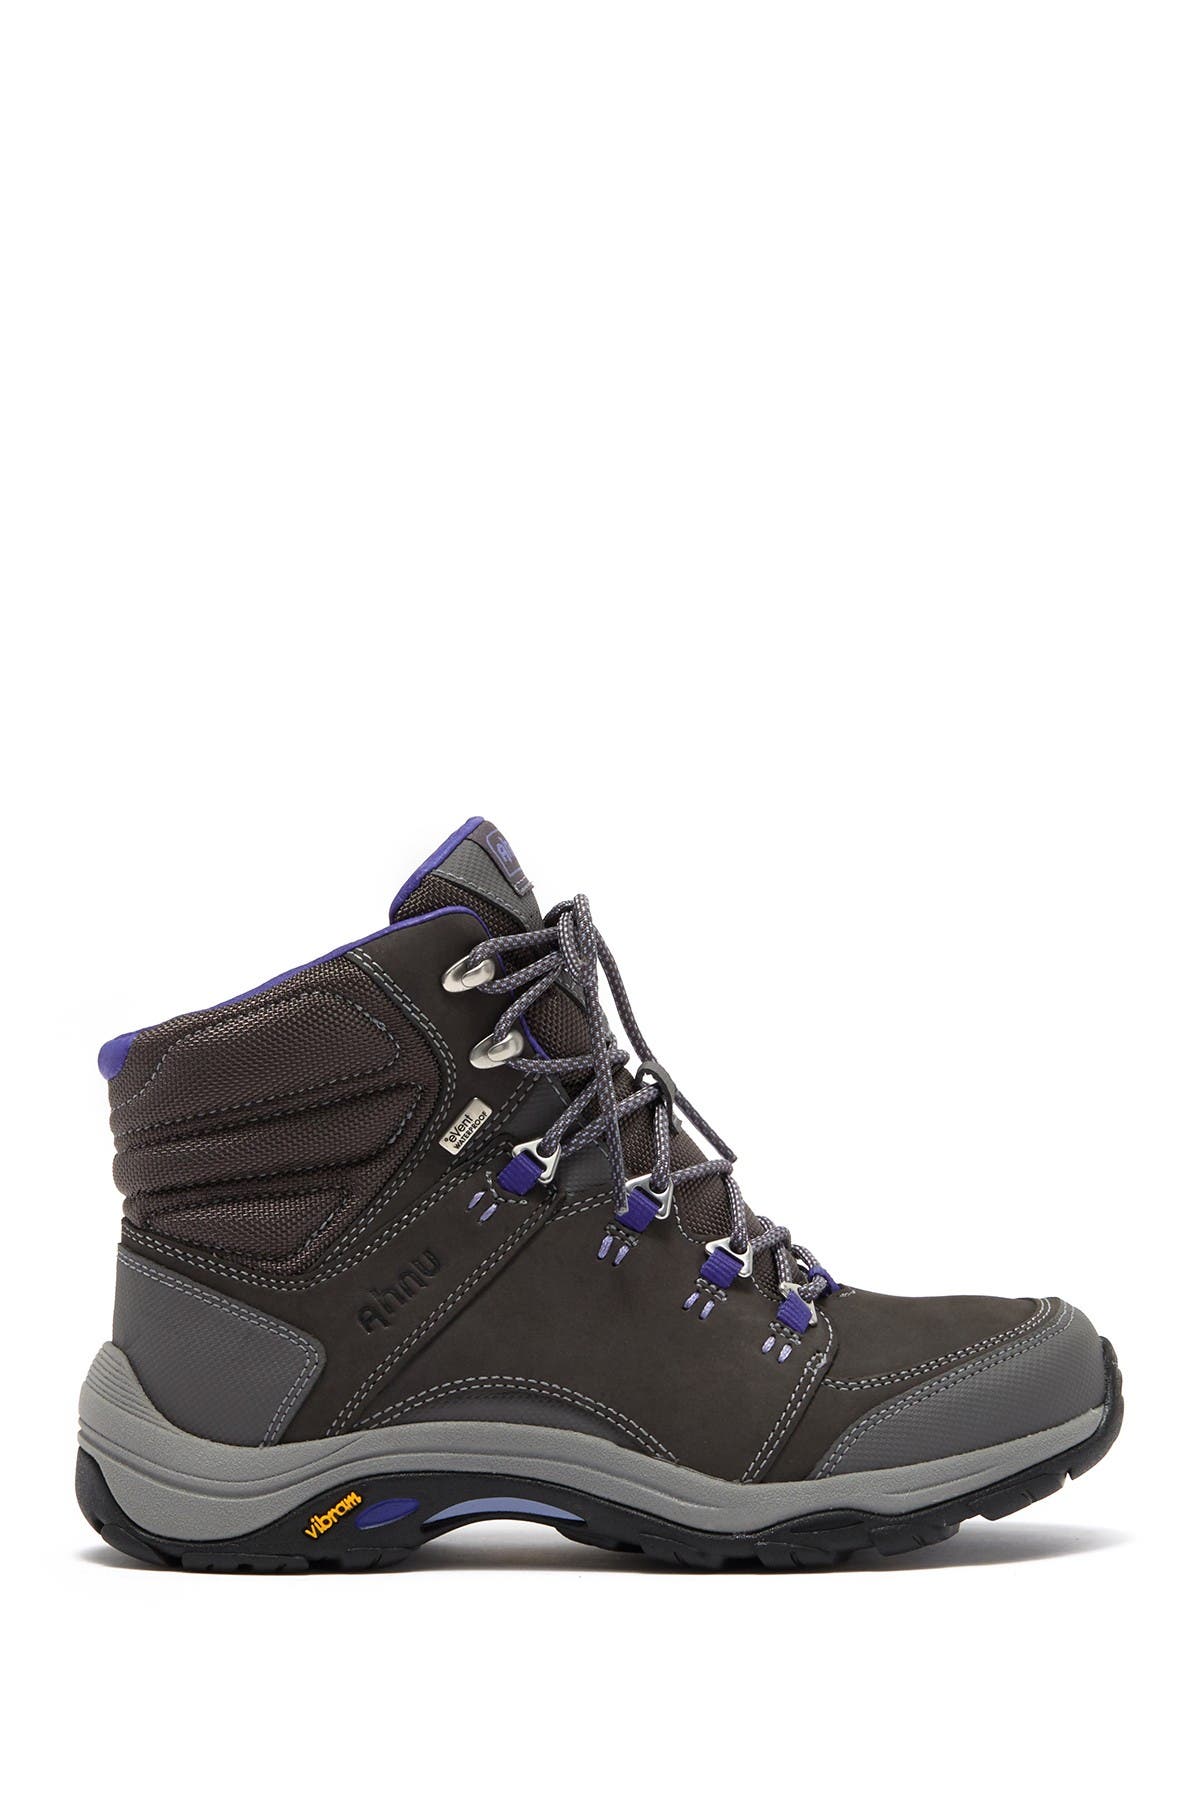 hiking boots nordstrom rack